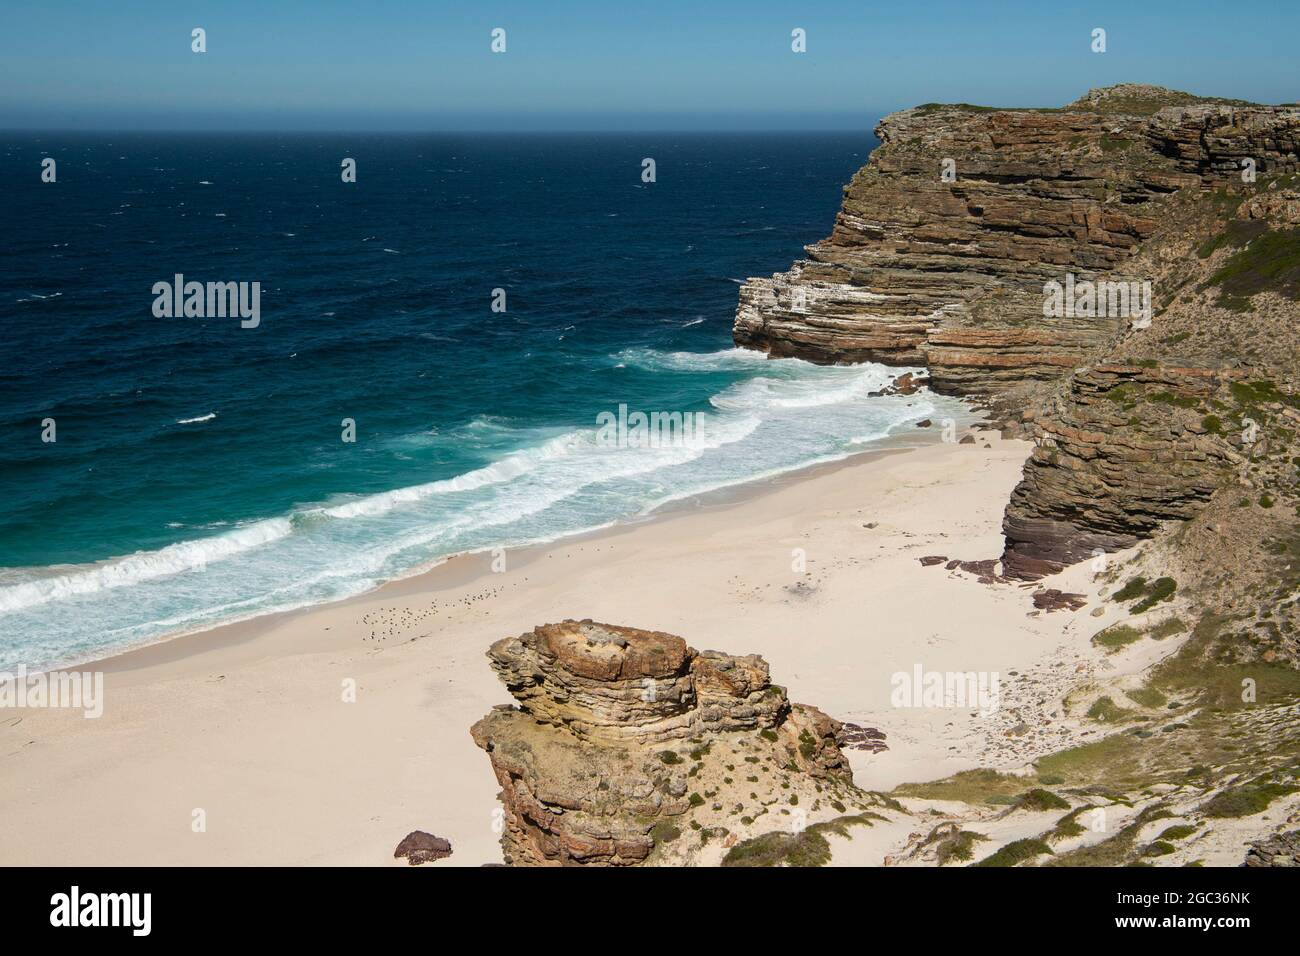 Cape Point, Cape of Good Hope Nature Reserve, Cape Peninsula, South Africa Stock Photo